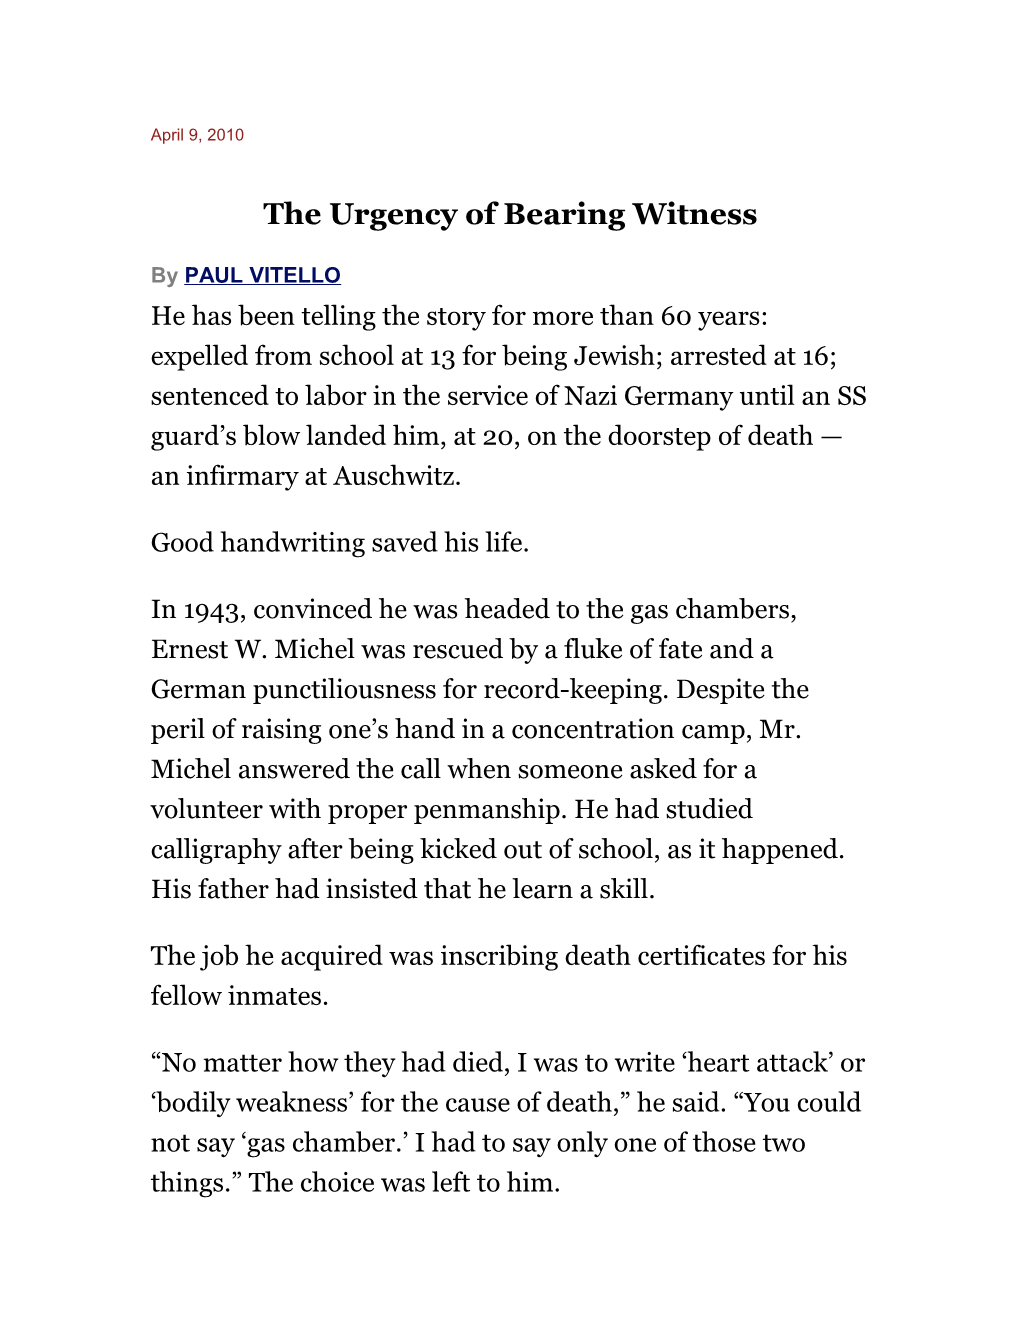 The Urgency of Bearing Witness